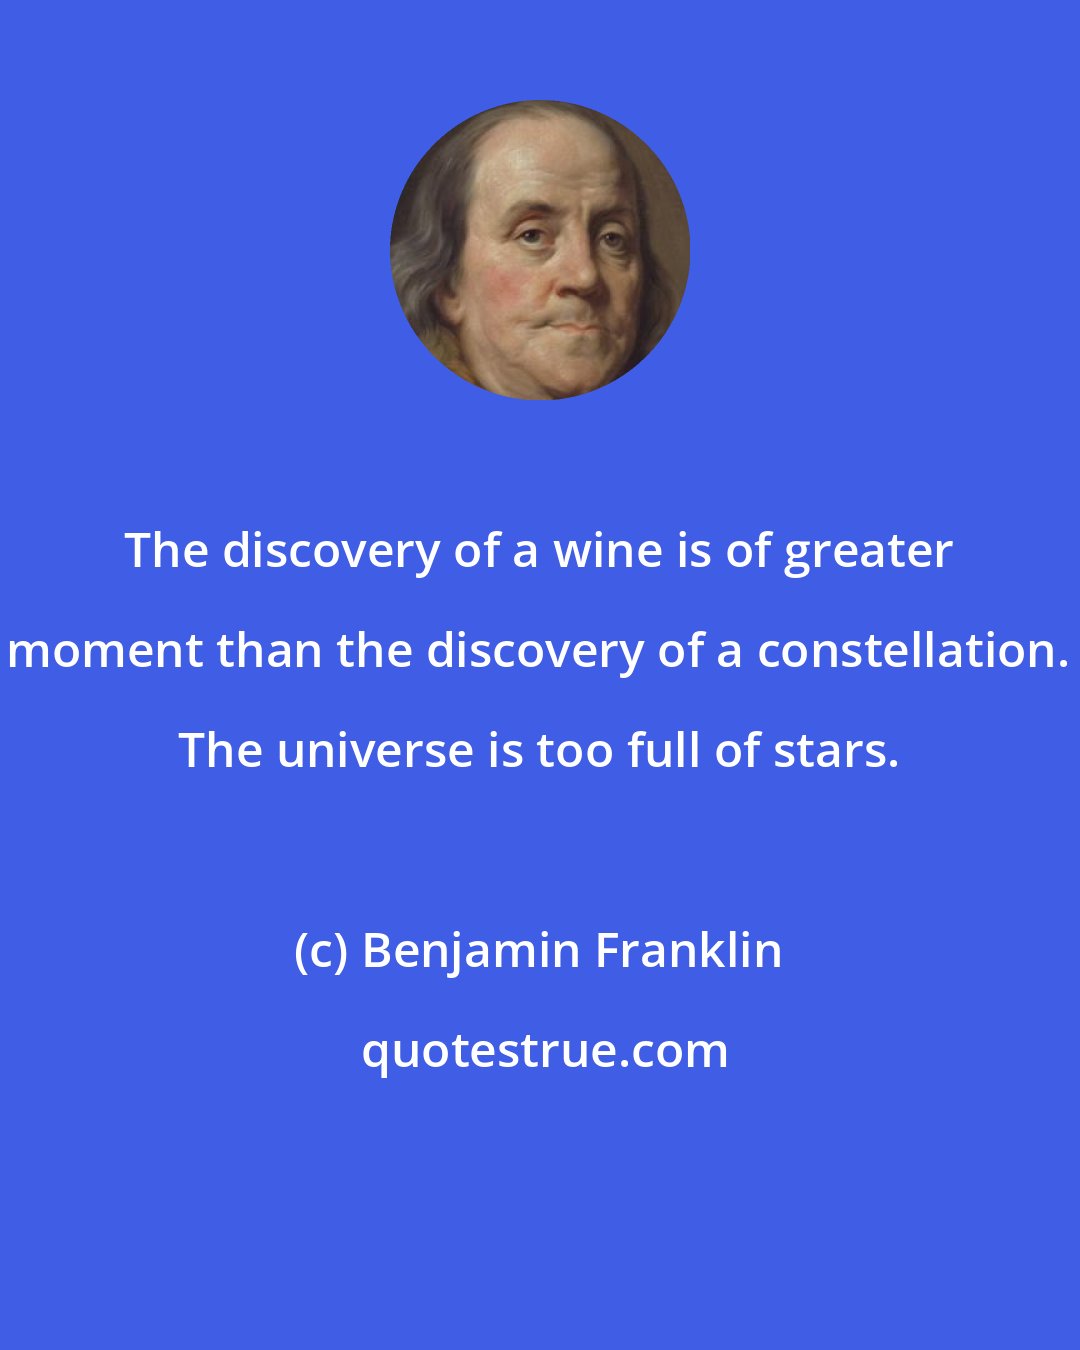 Benjamin Franklin: The discovery of a wine is of greater moment than the discovery of a constellation. The universe is too full of stars.